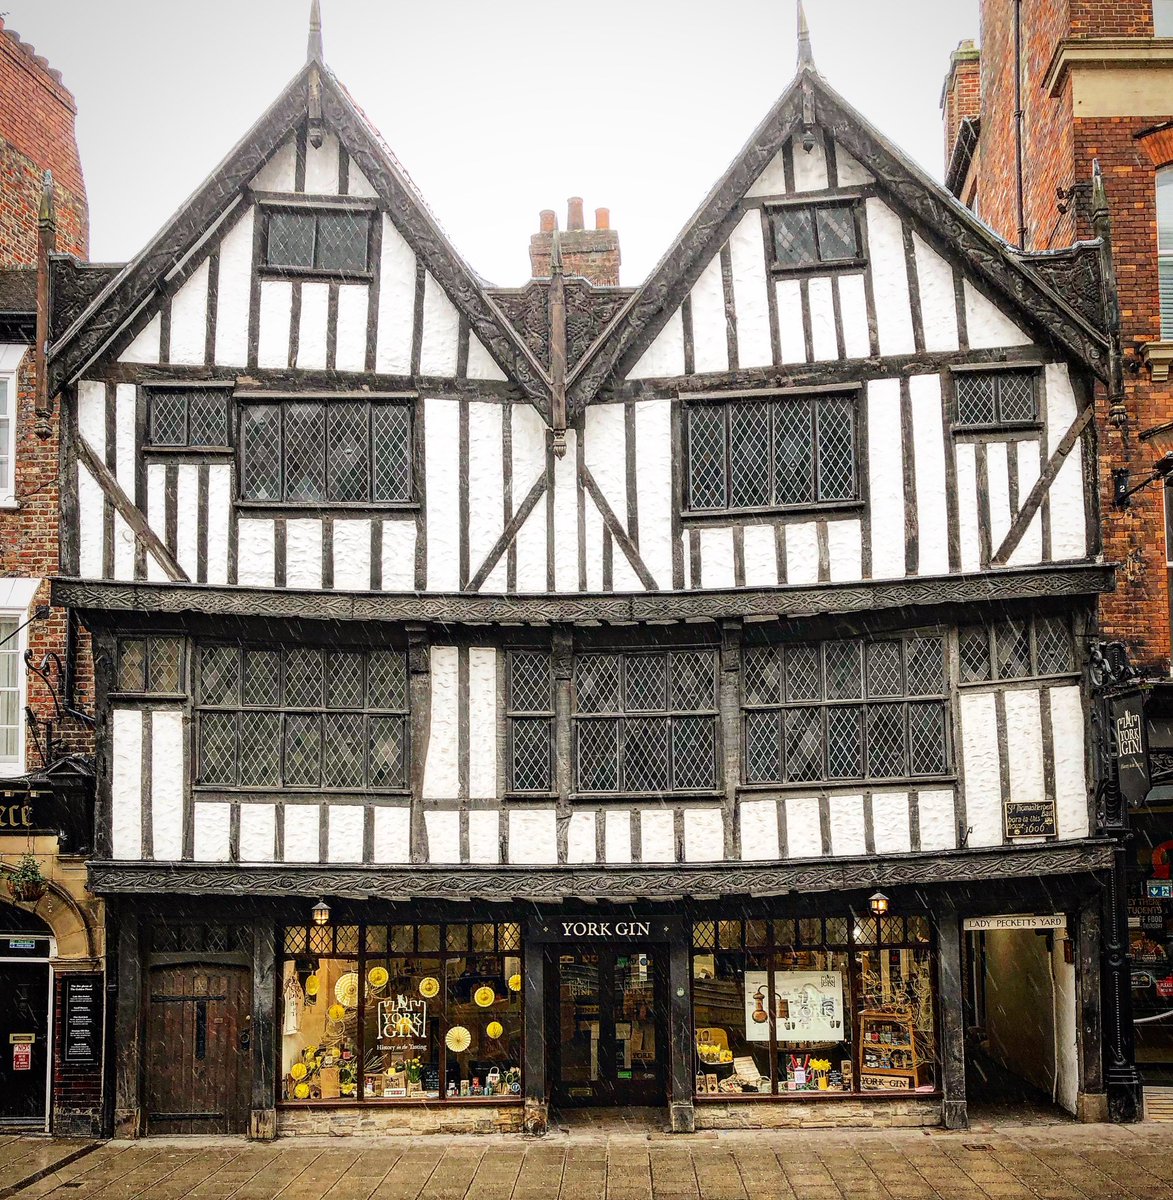 #walkingtour introducing you to #York‘s most iconic sights - such as this - and hidden gems … one step at a time

#tour #vacation #visityork #loveyork #EnglishTourismWeek23